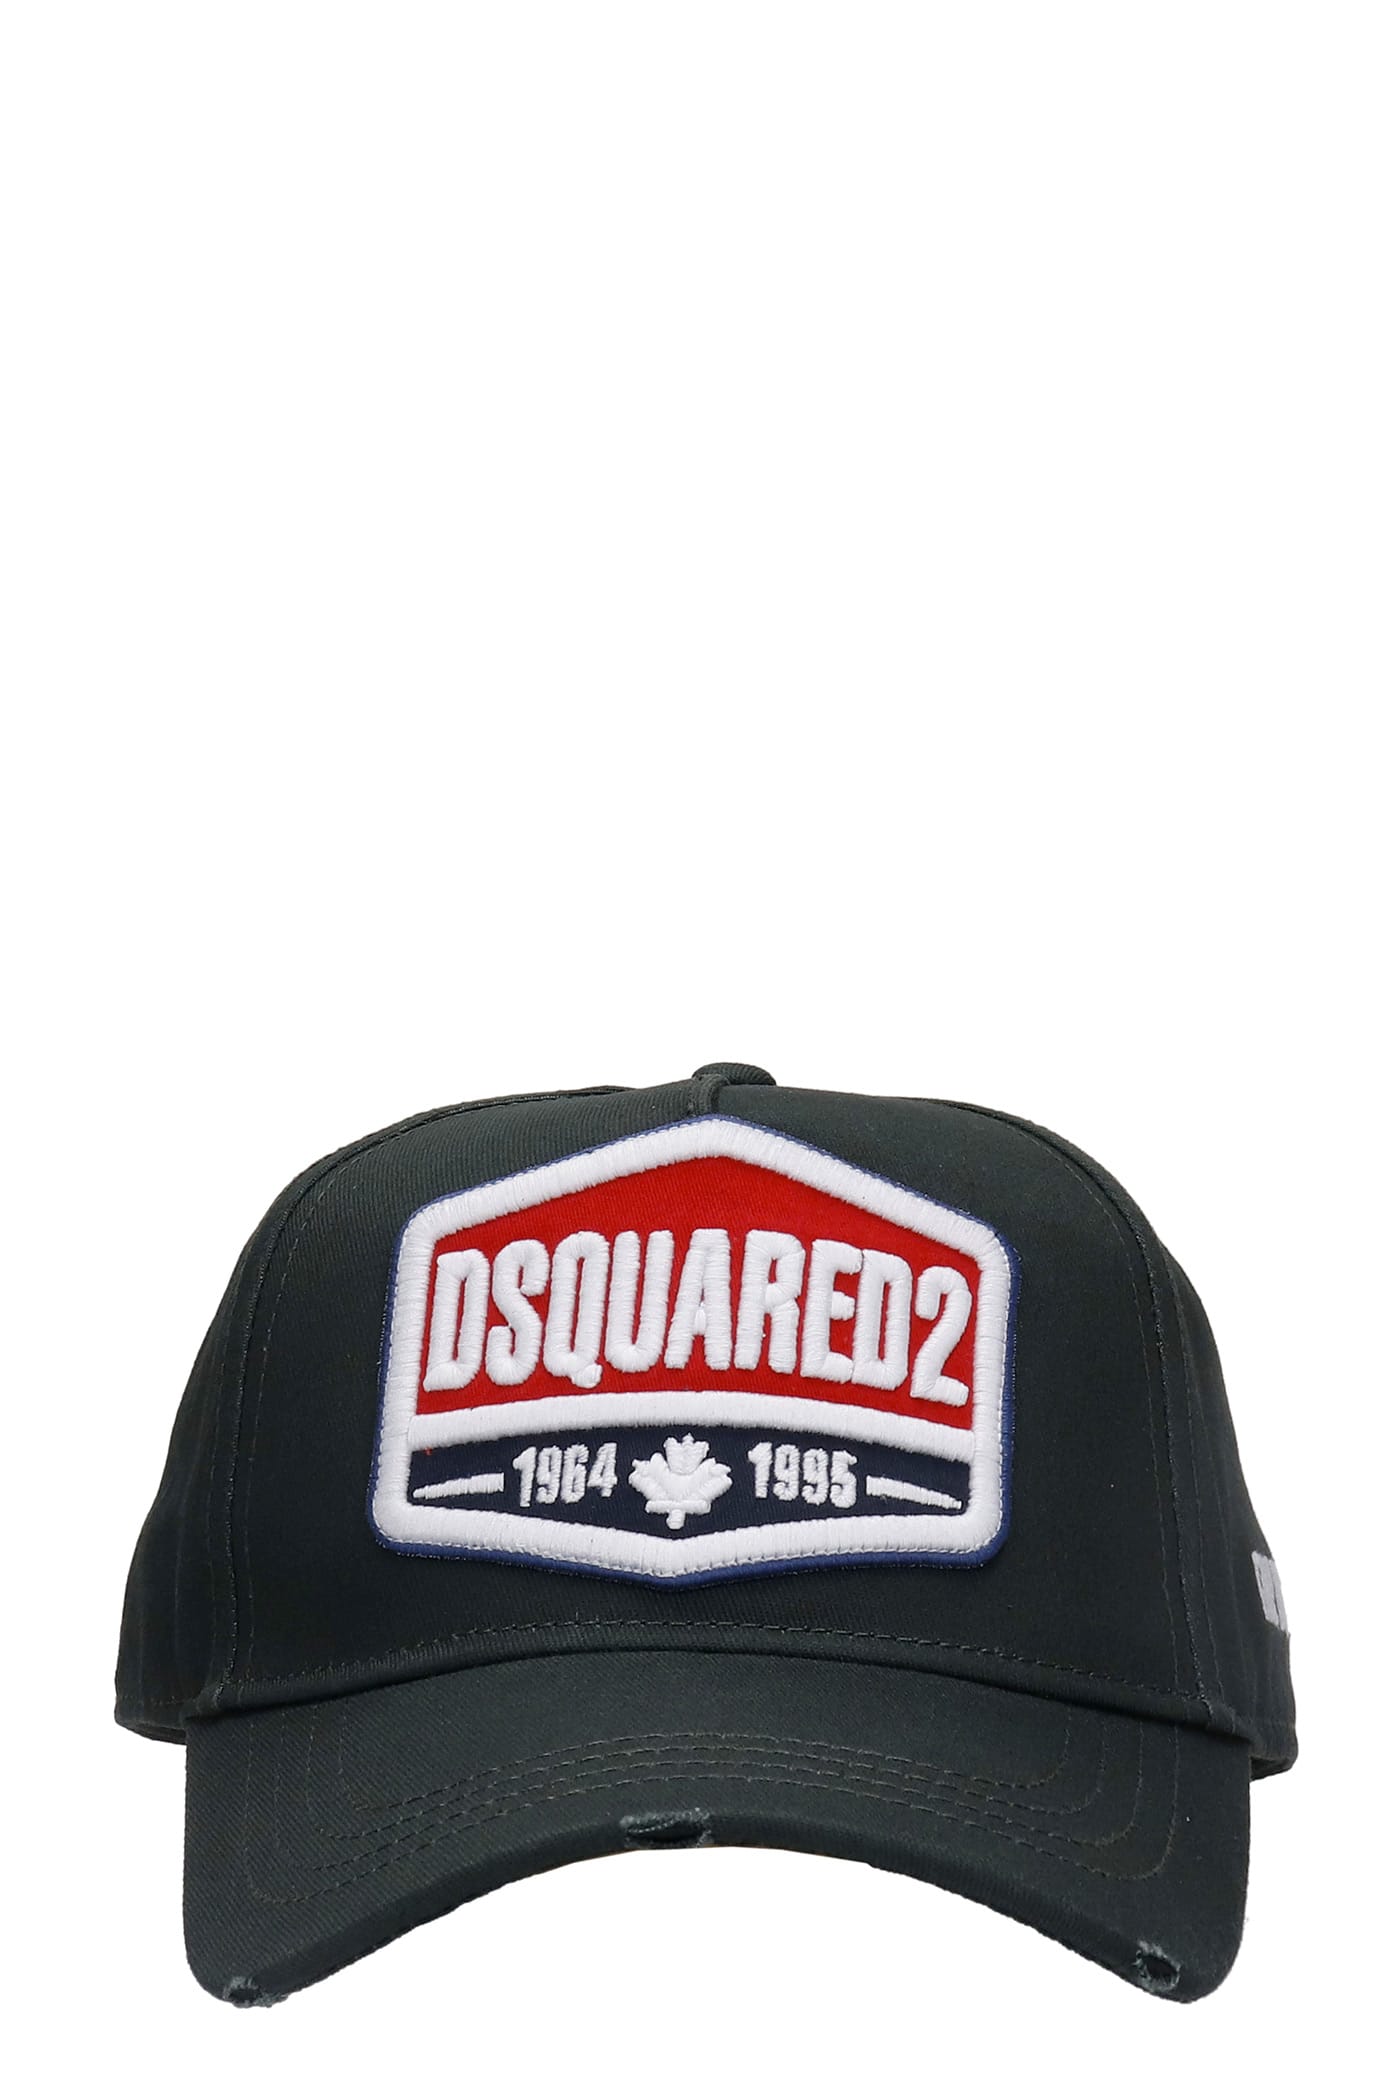 Dsquared2 Hats In Camouflage Cotton